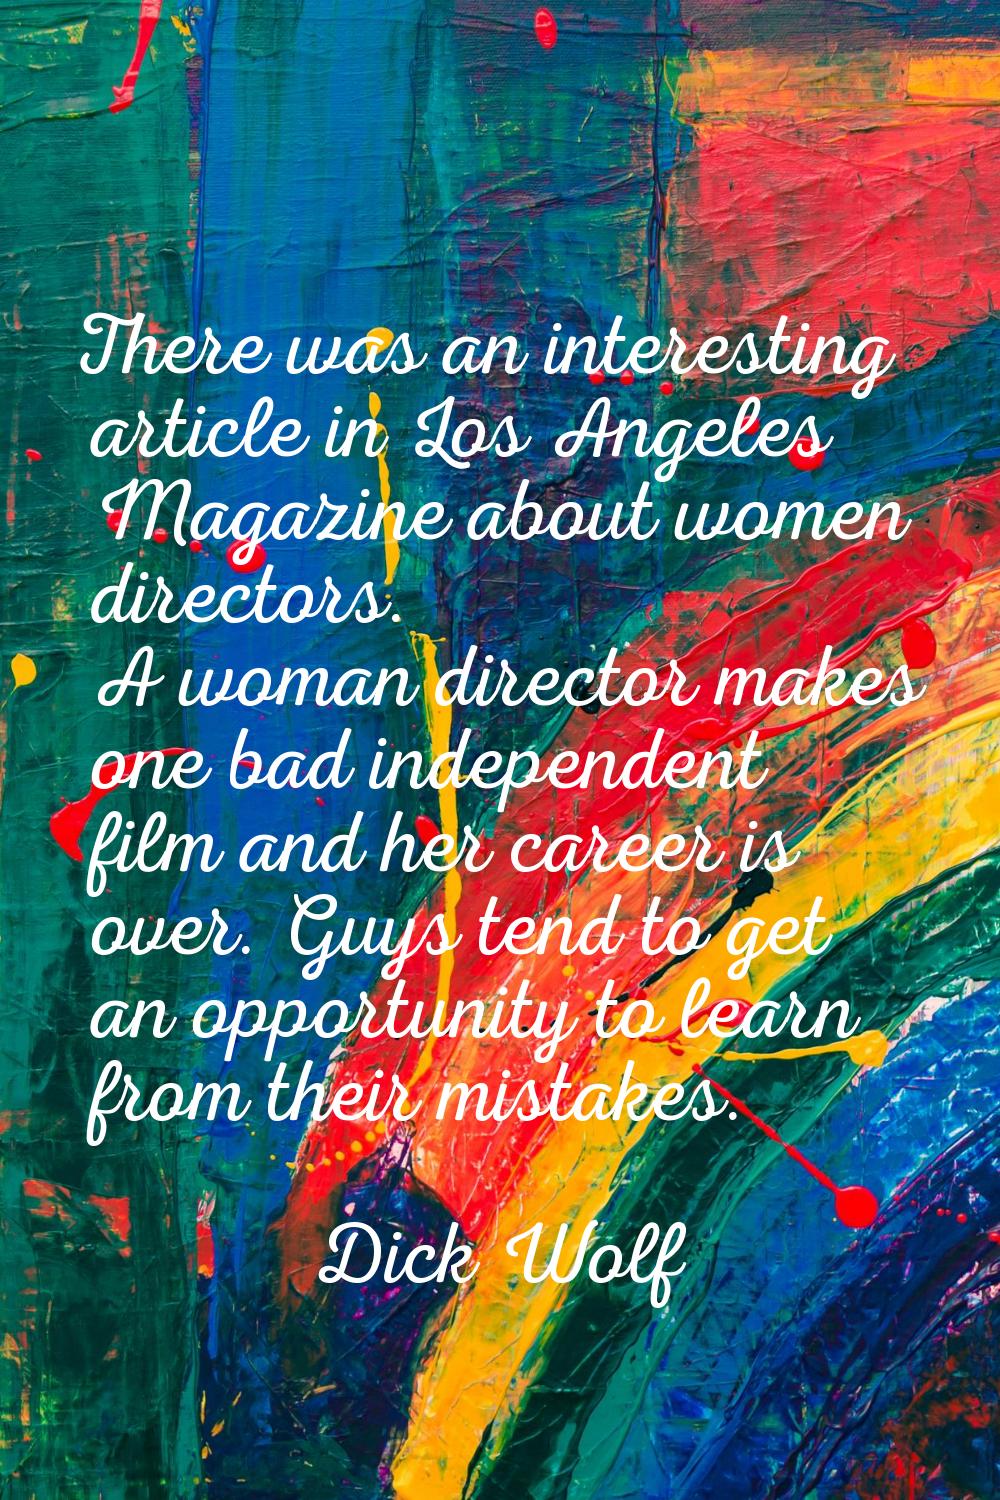 There was an interesting article in Los Angeles Magazine about women directors. A woman director ma